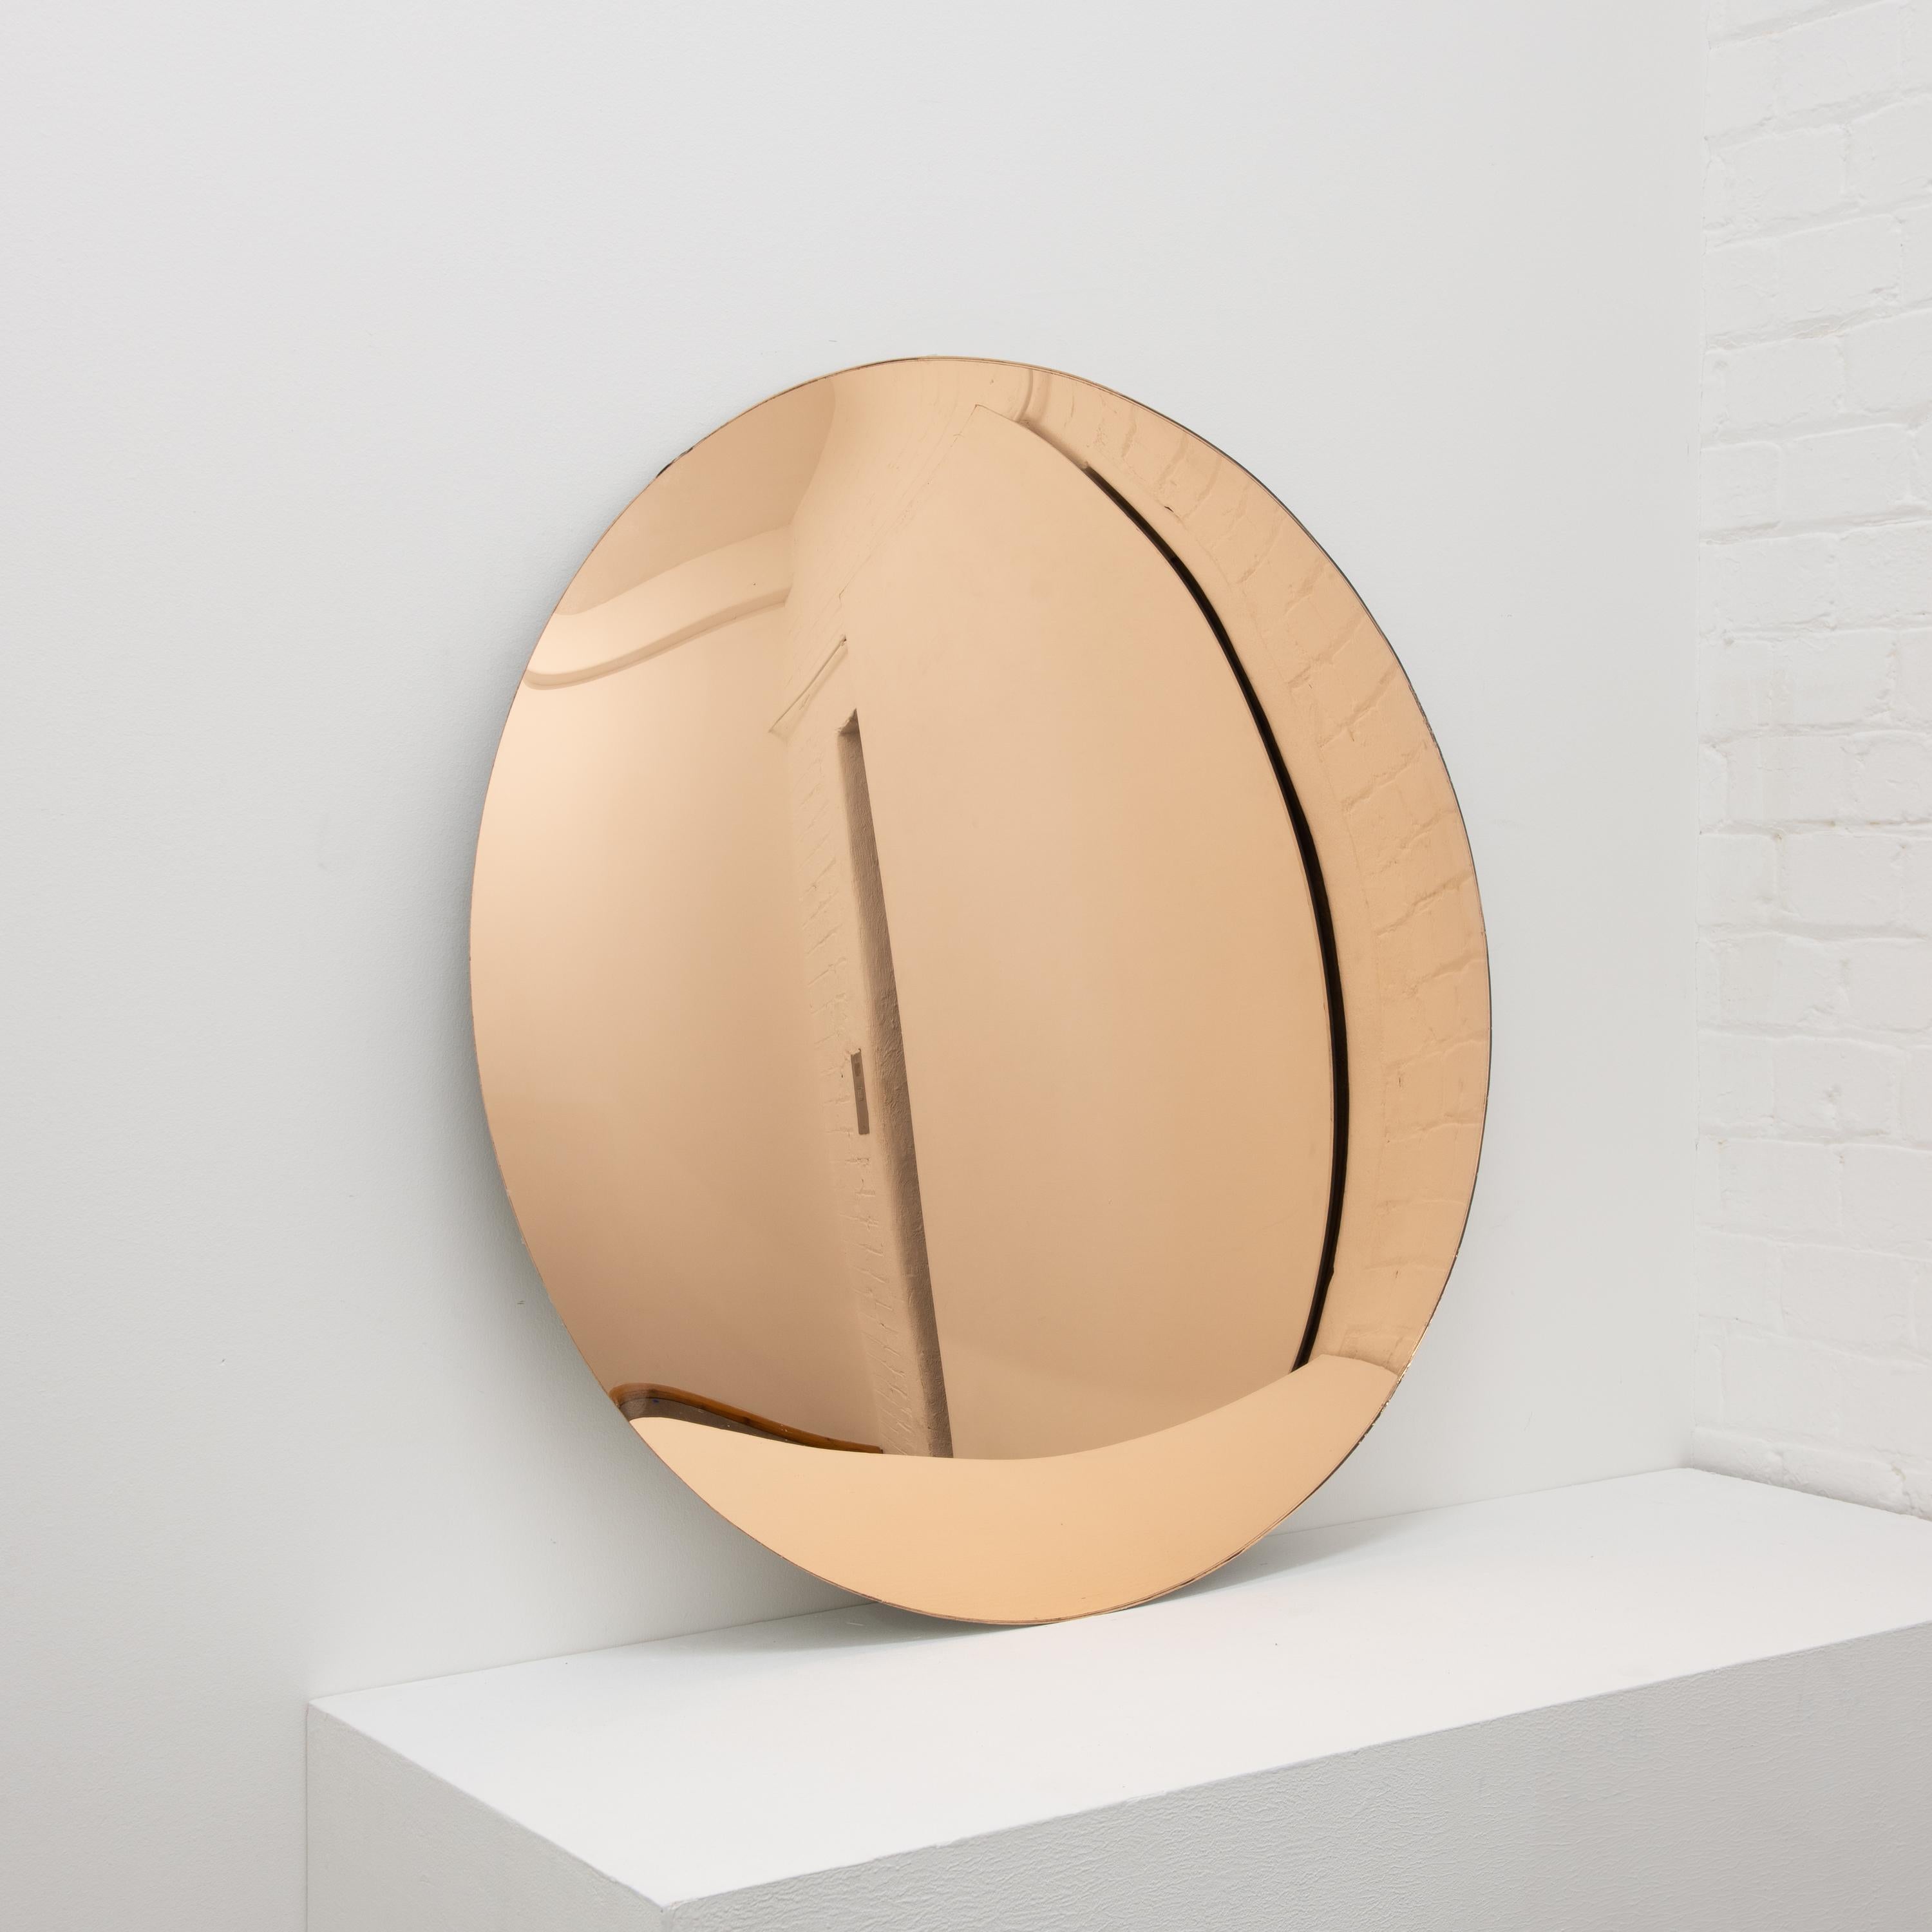 Beautiful rose gold tinted convex frameless mirror with brass clips.

Each Orbis™ convex mirror is designed and handcrafted in London, UK. Slight variations in sizes and imperfections on edges and surface finishes are characteristics of such